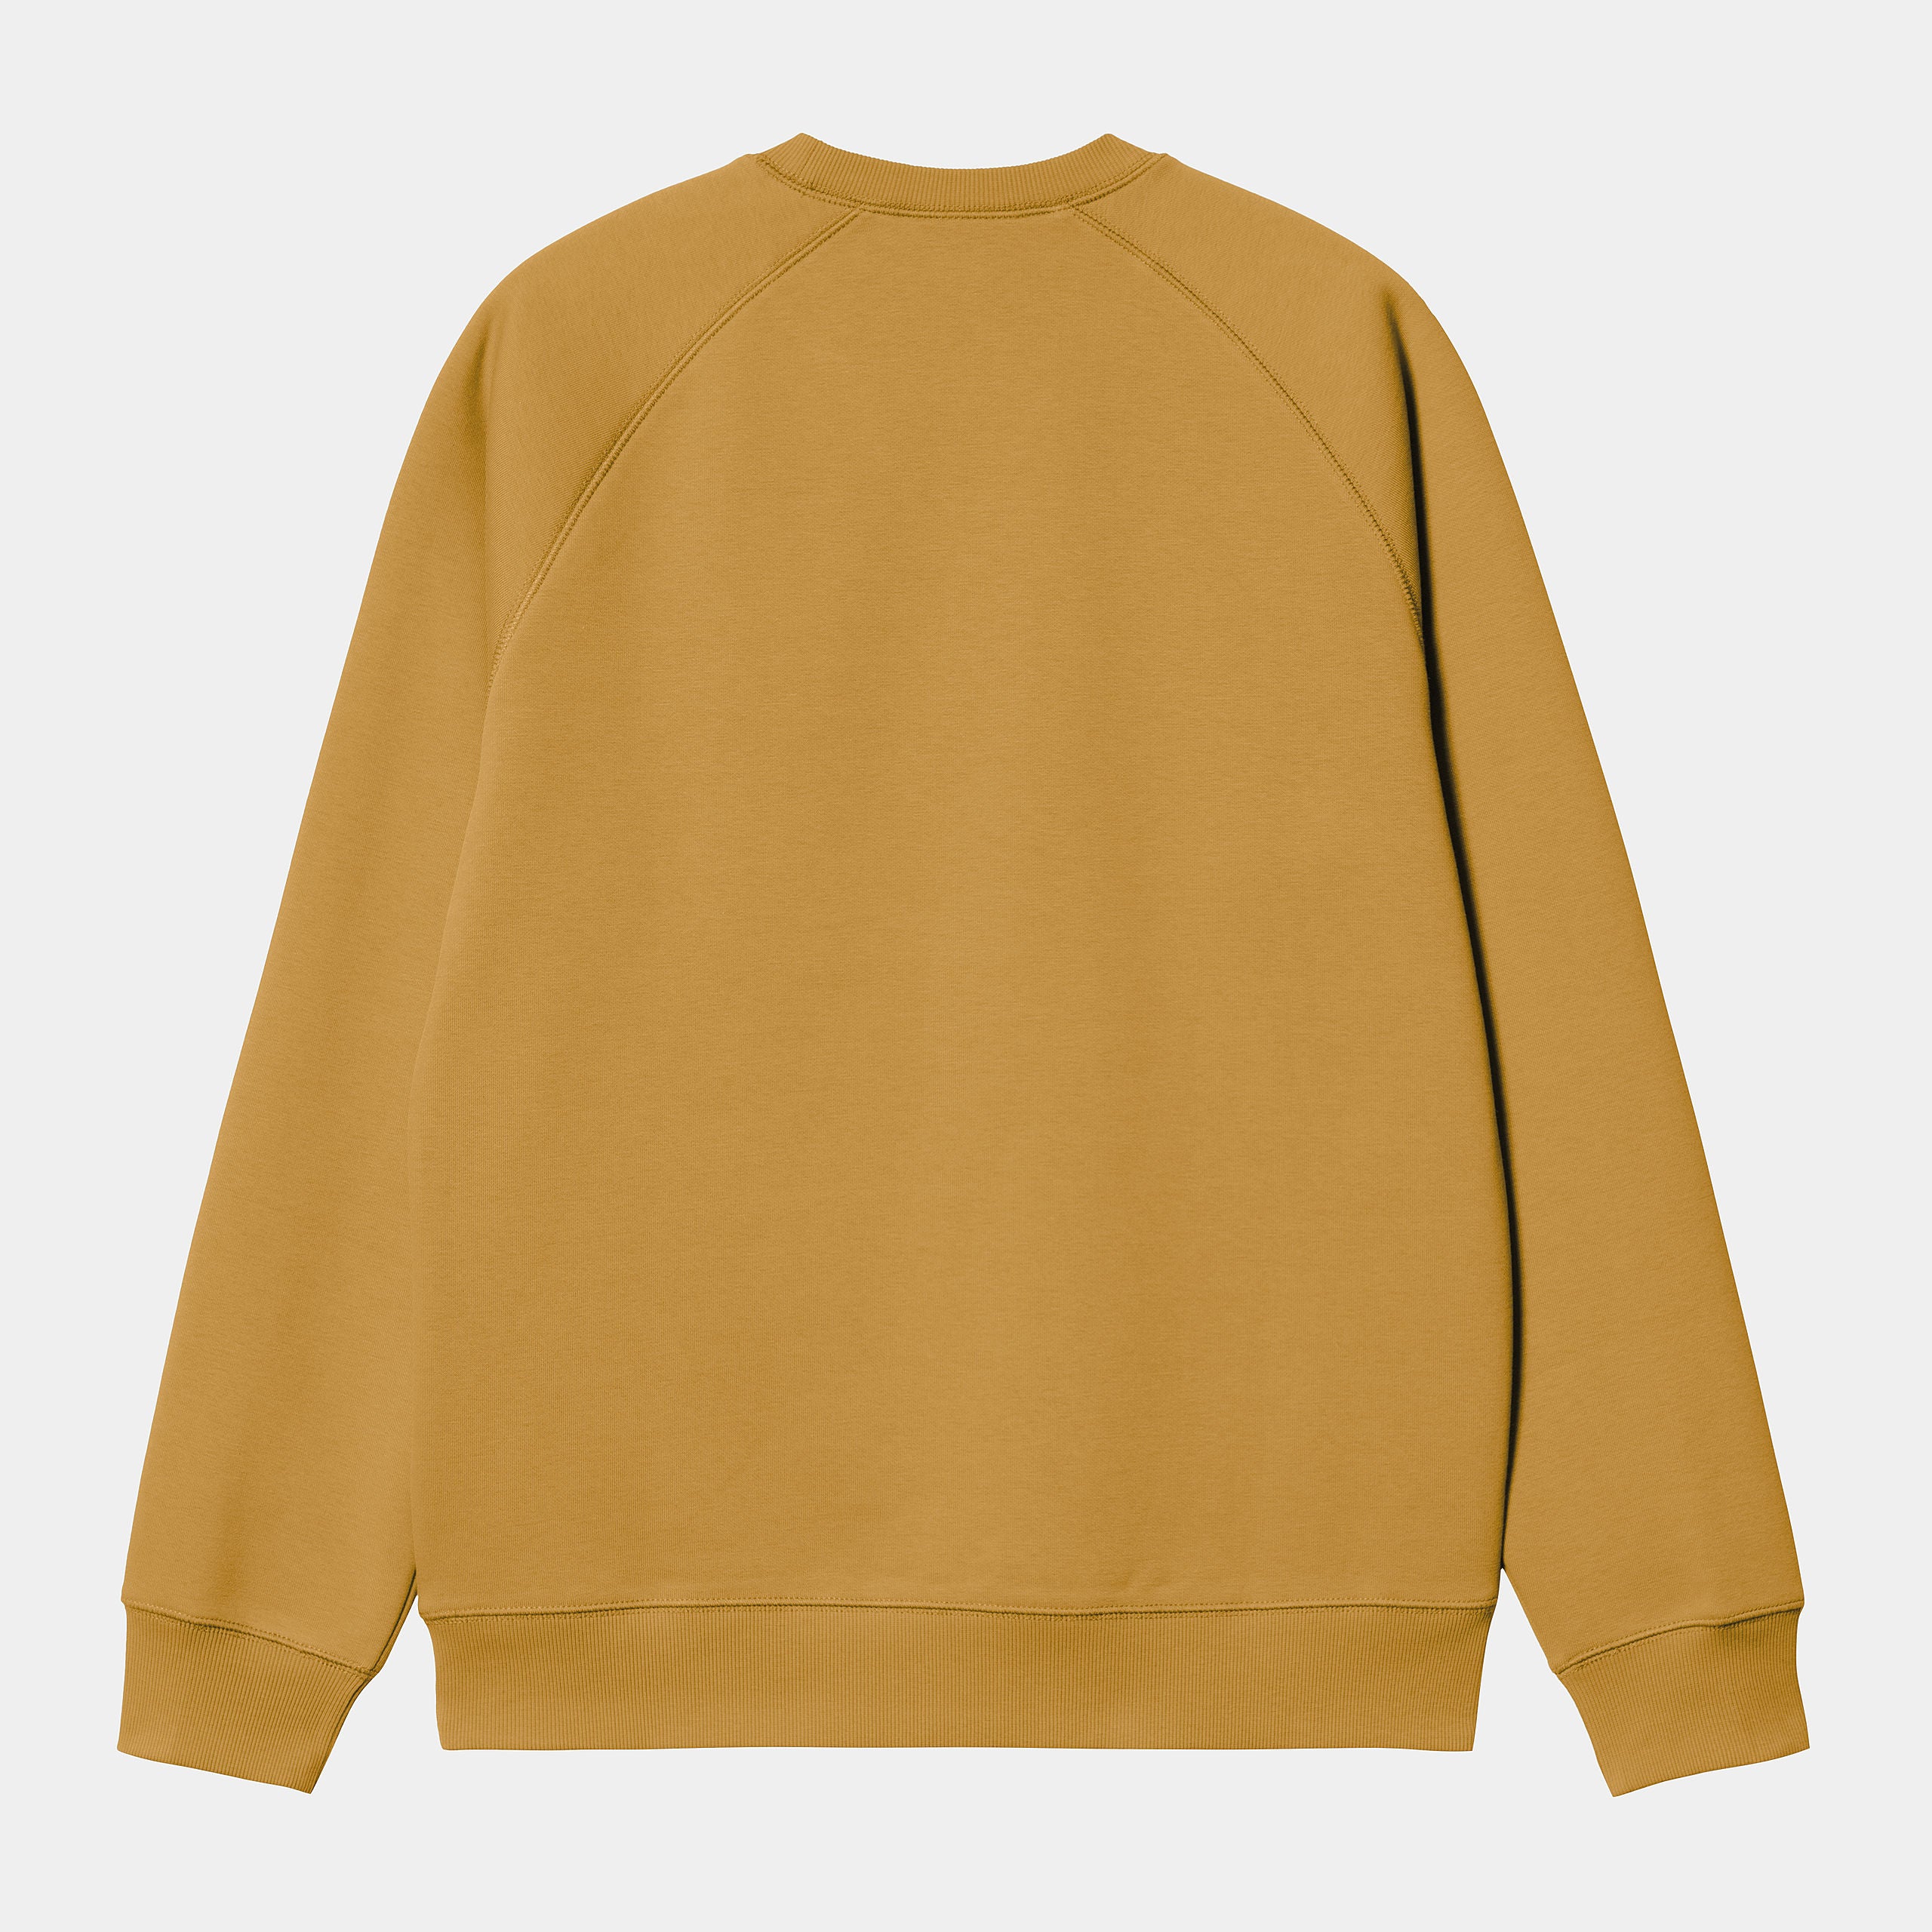 chase-sweat-sunray-gold-77_png_09dcc4ee-ffe3-4830-b858-5c29f9ee8a7c.jpg